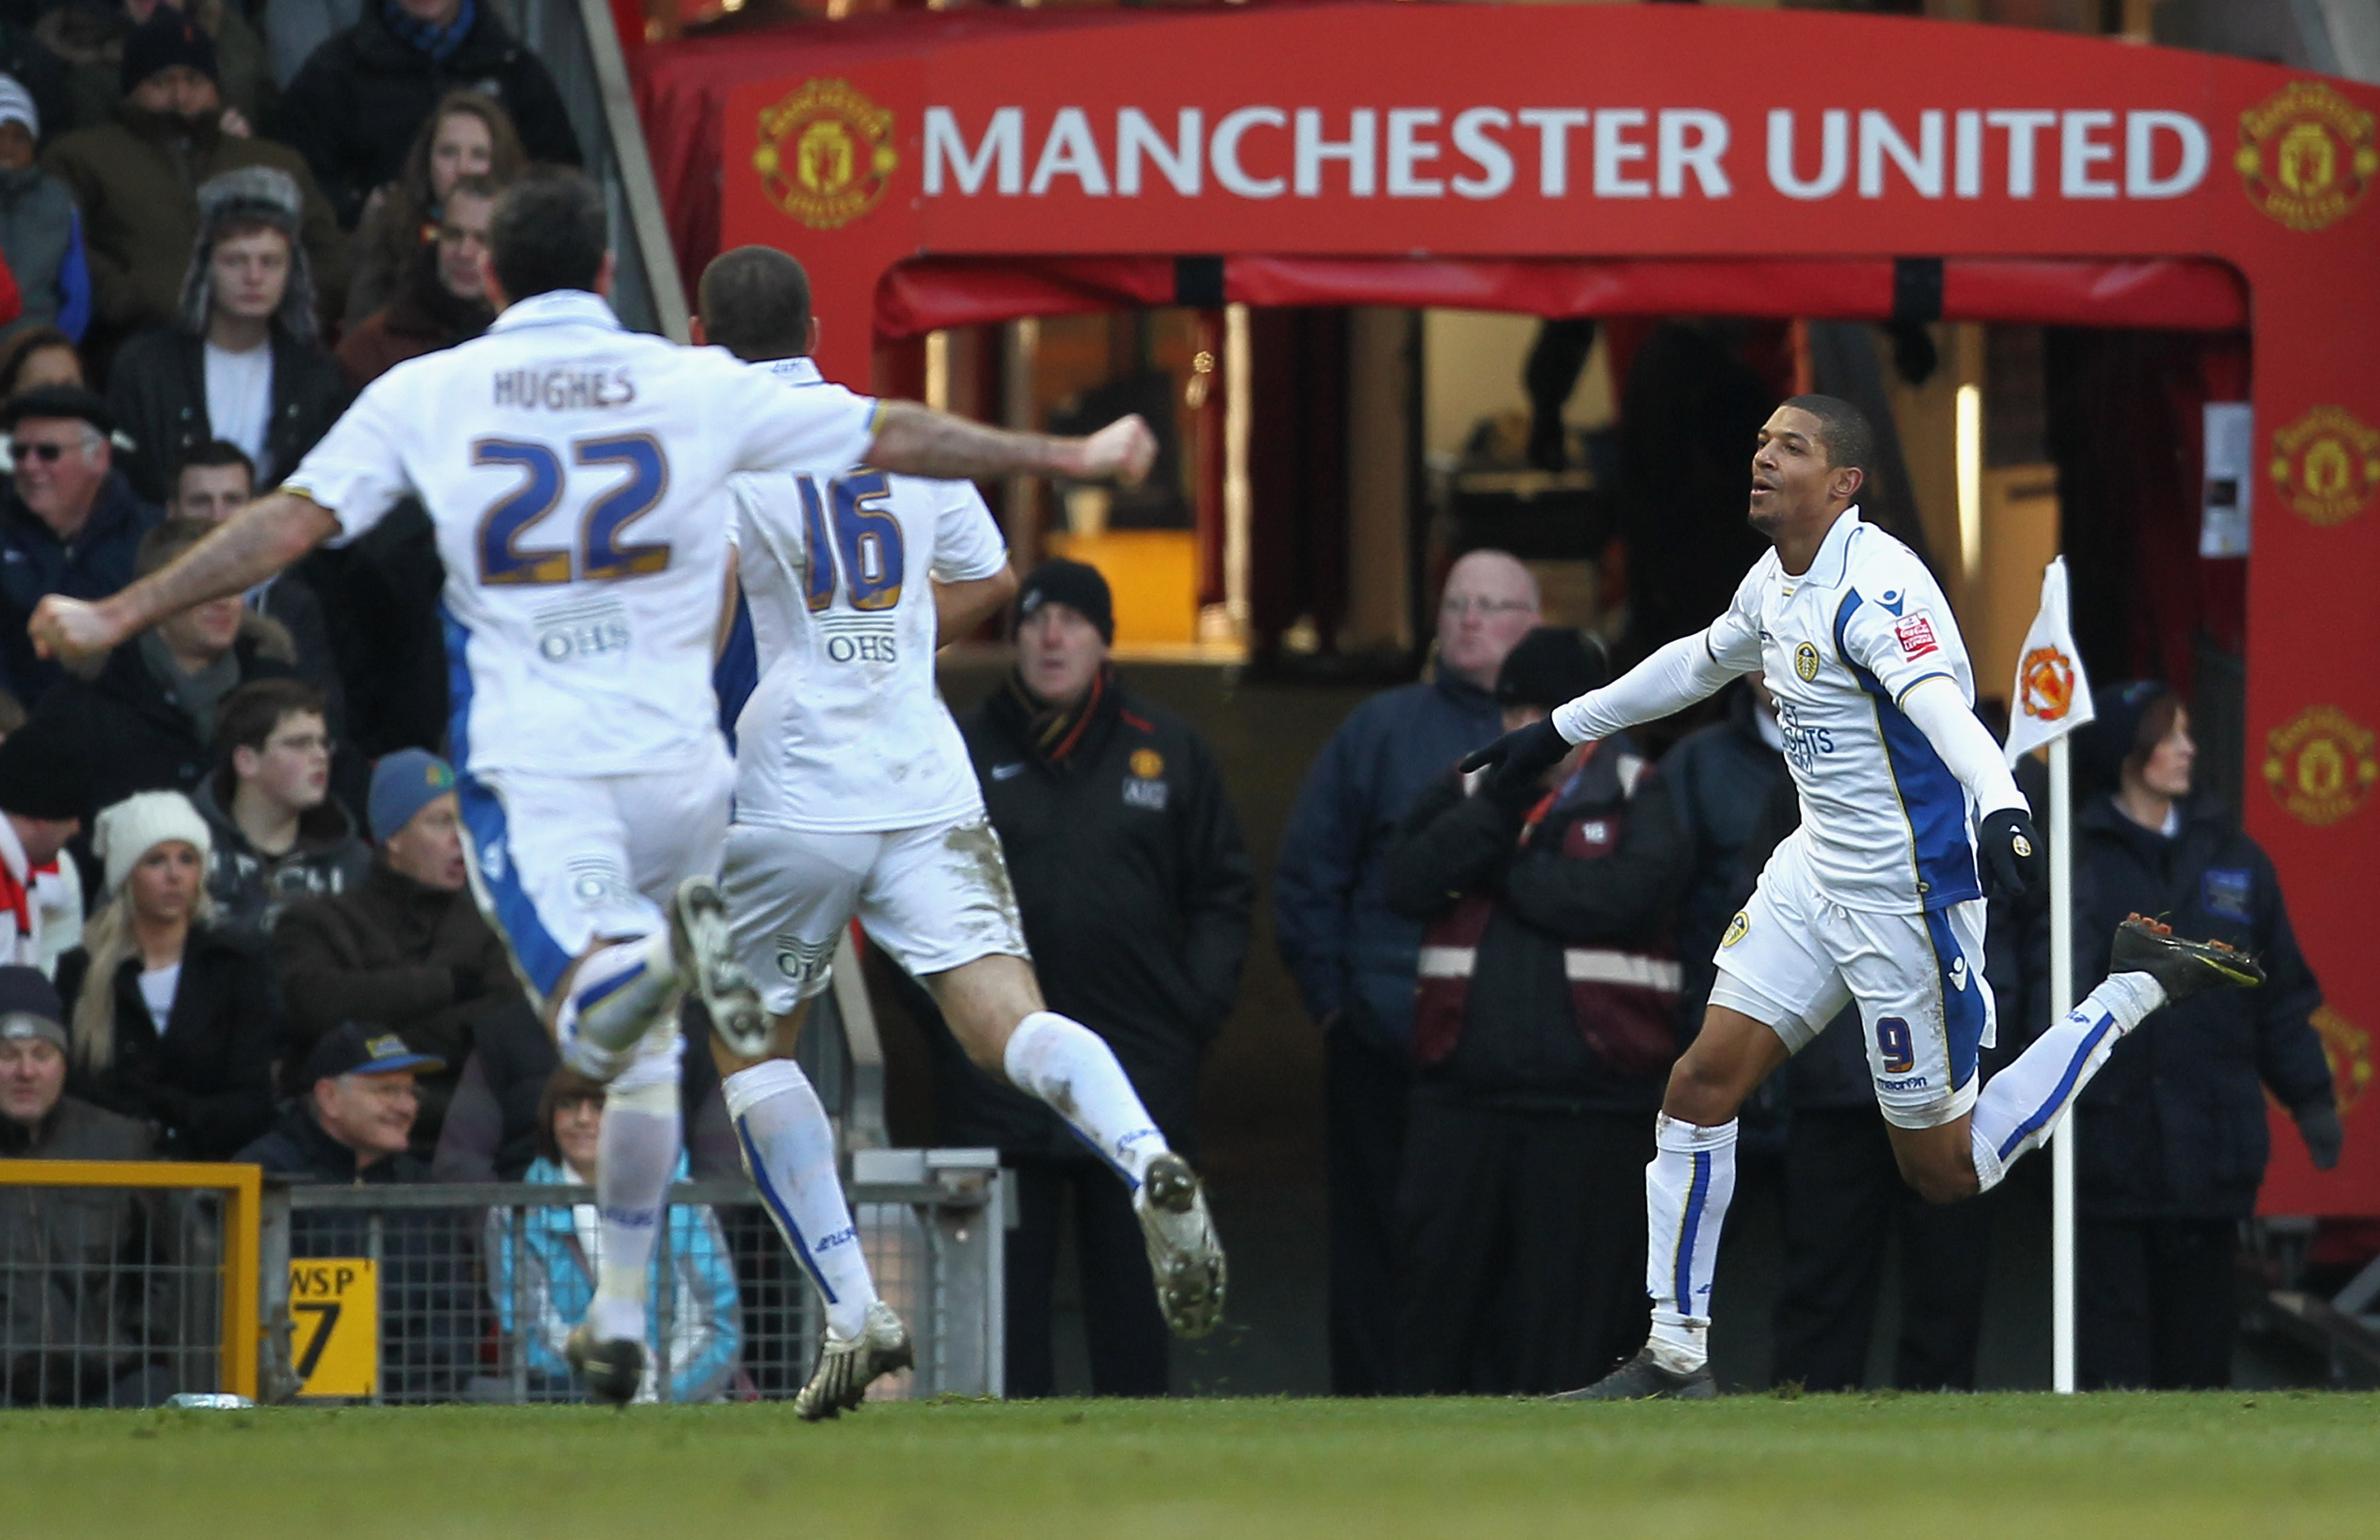 MANCHESTER, ENGLAND - JANUARY 03:  Jermaine Beckford (R) of Leeds United celebrates scoring the opening goal during the FA Cup sponsored by E.ON 3rd Round match between Manchester United and Leeds United at Old Trafford on January 3, 2010 in Manchester, E